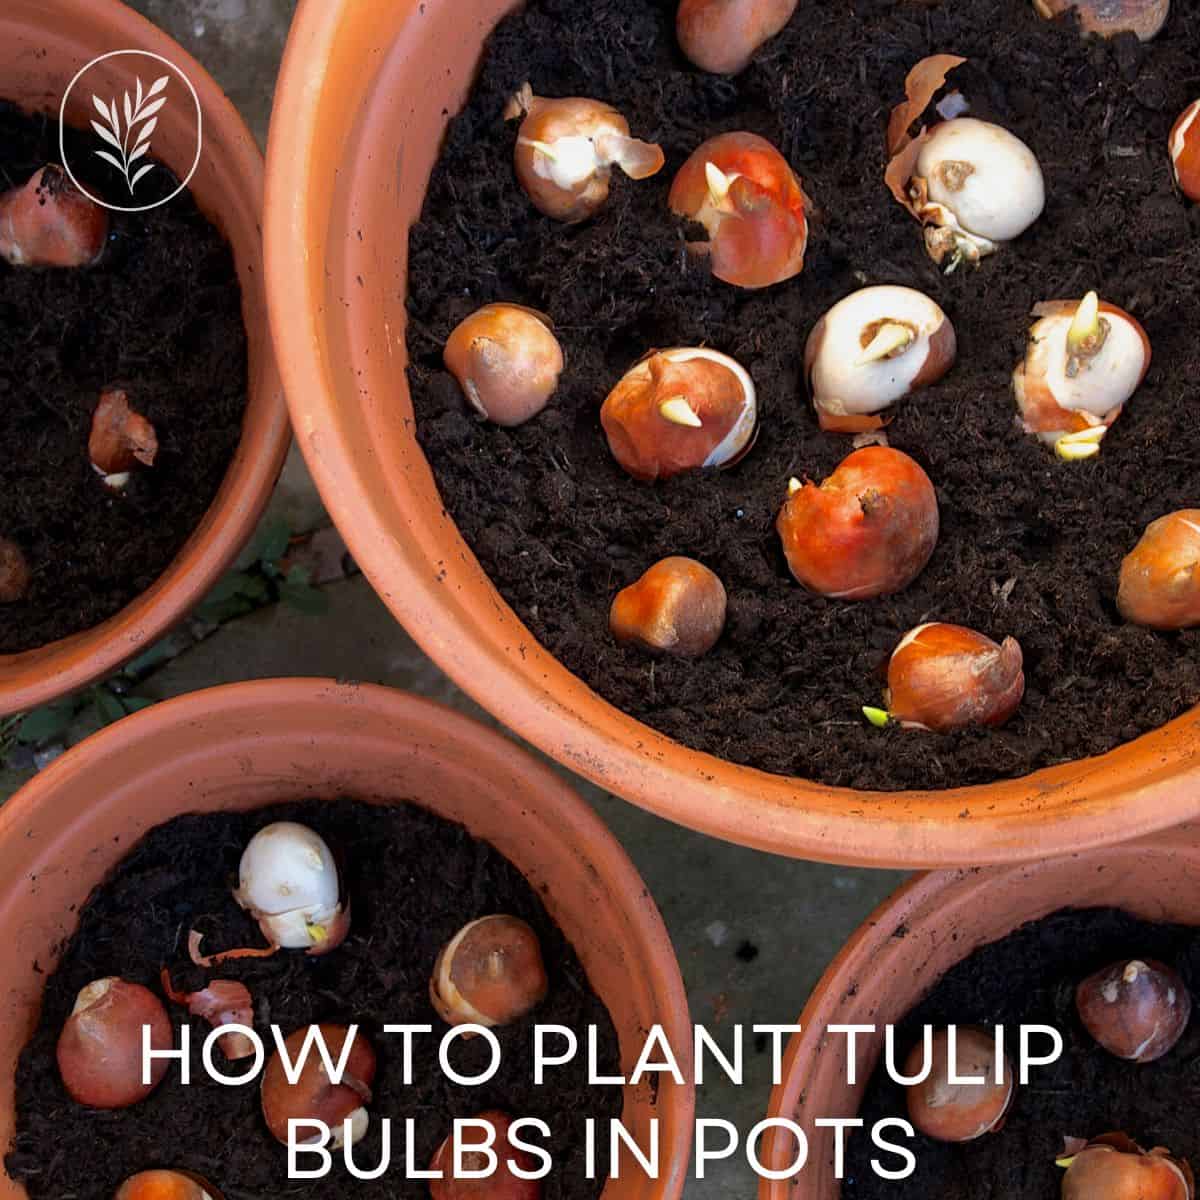 How to plant tulip bulbs in pots via @home4theharvest